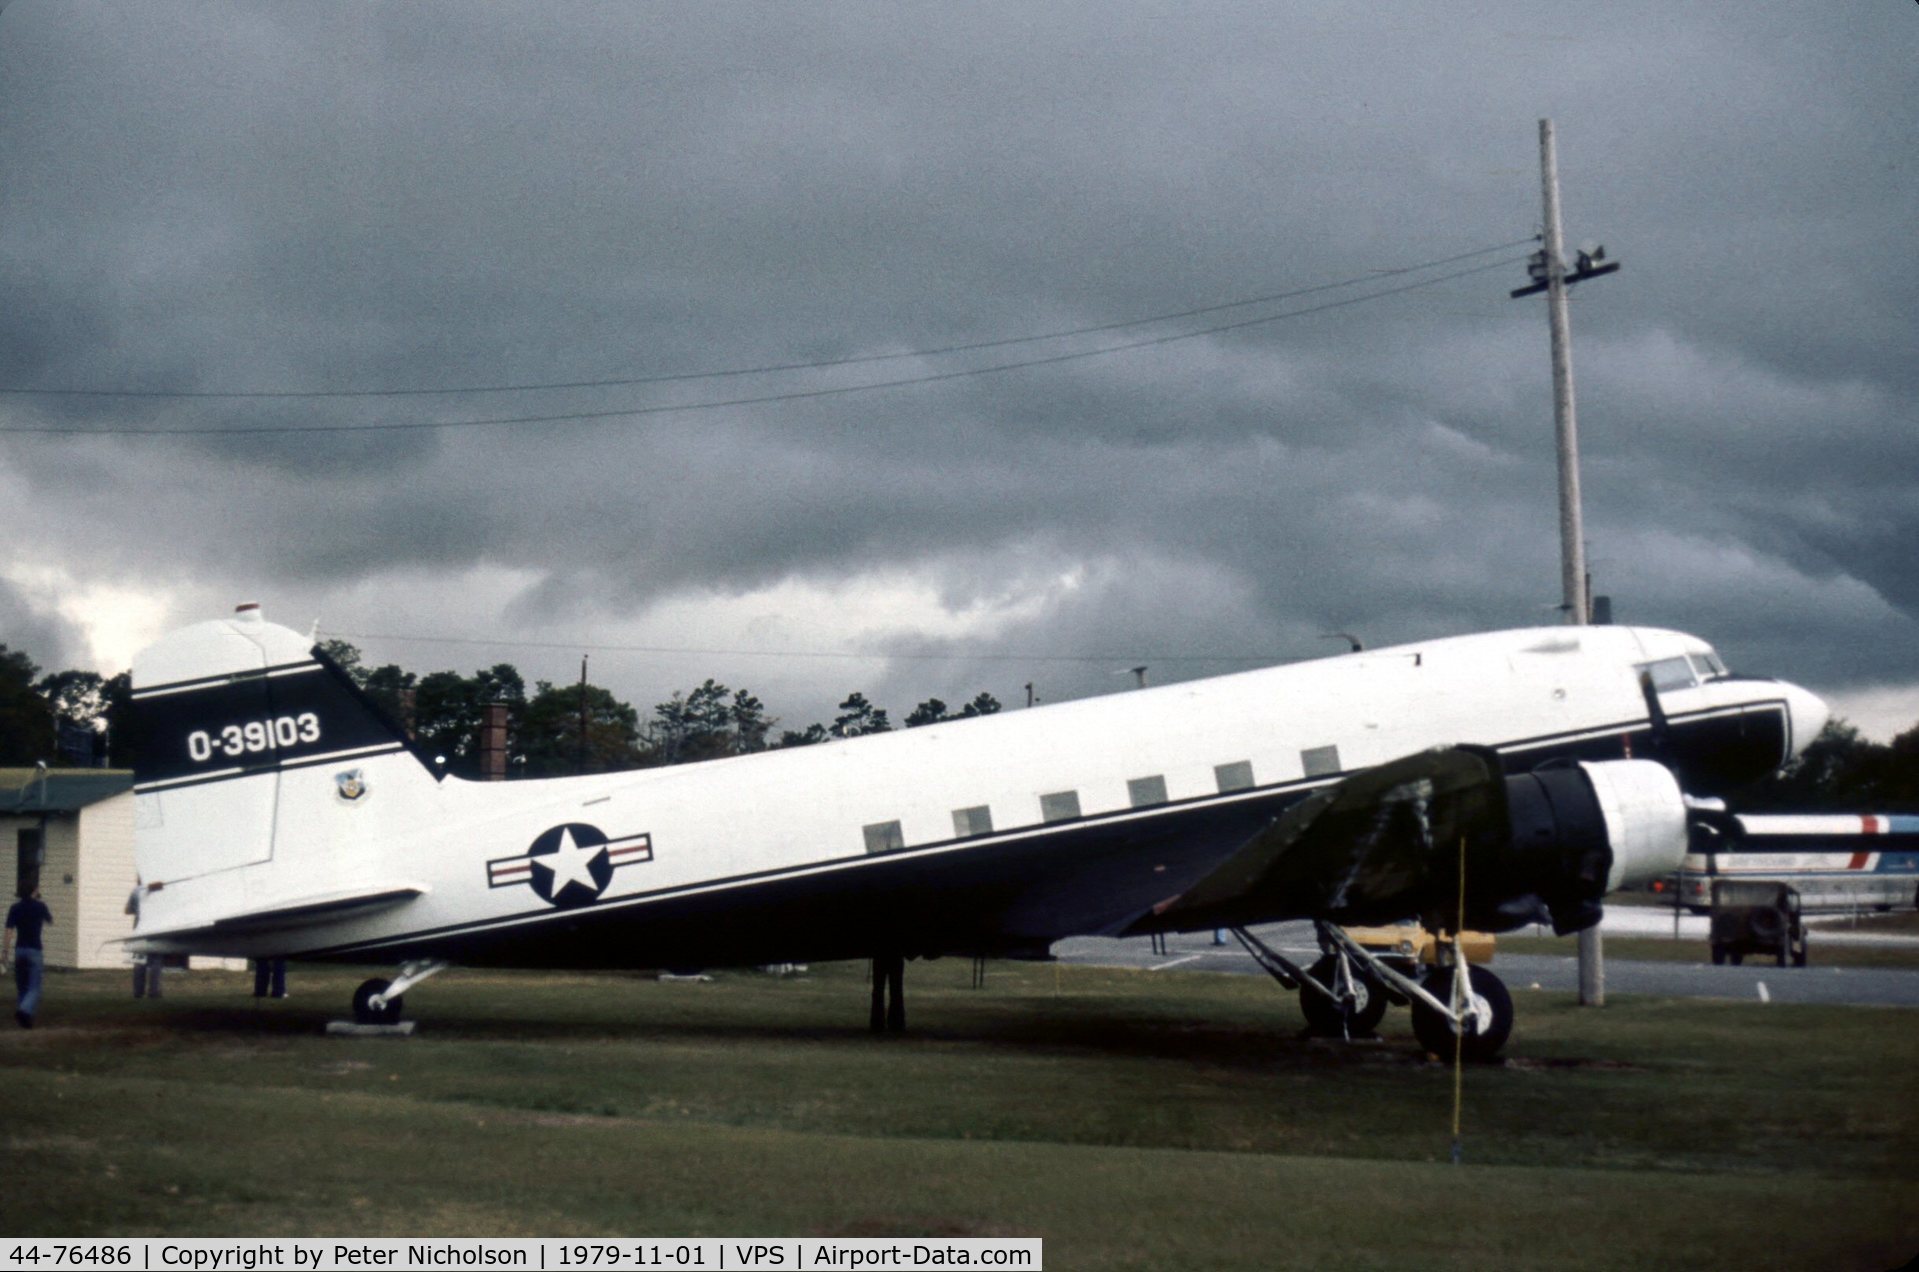 44-76486, 1944 Douglas C-47B-25-DK (R4D-7) Skytrain C/N 16070, In 1979 this Skytrain was displayed at the USAF Armament Museum in US Army markings as a NC-47B model.